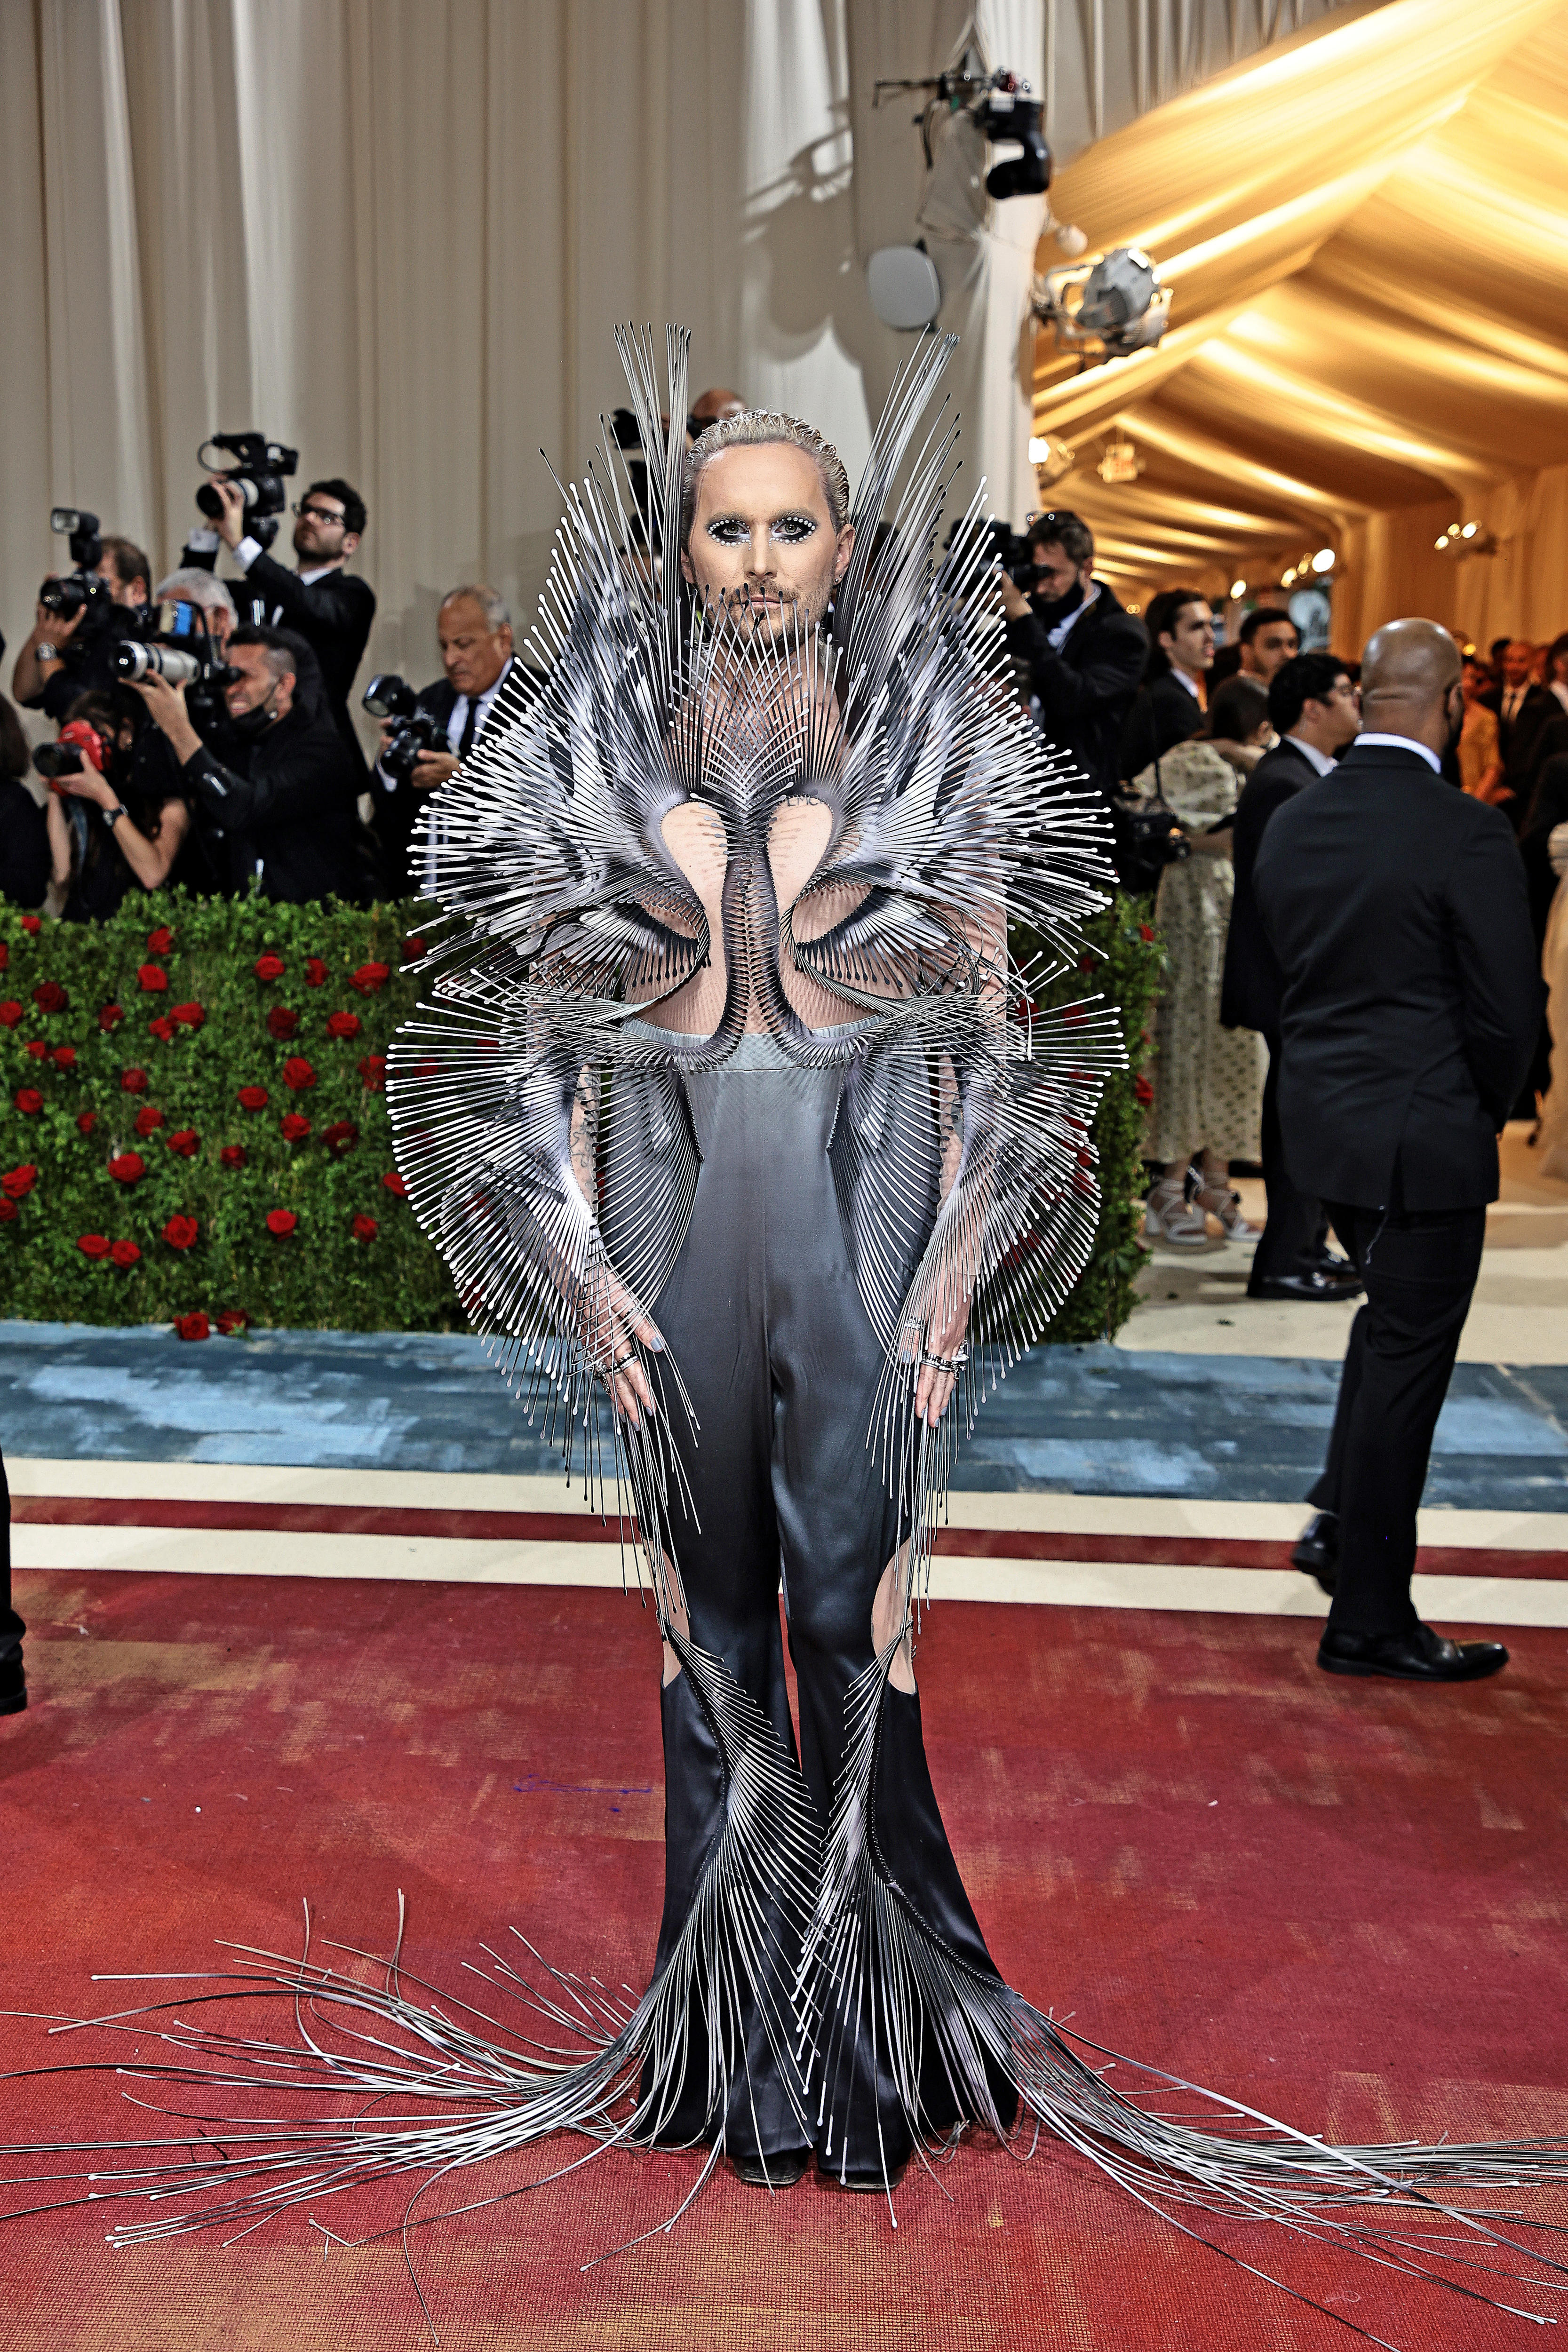 Fredrik Robertsson wears a metallic spiky costume with spines coming from his shoulders, arms and fingers on the met gala